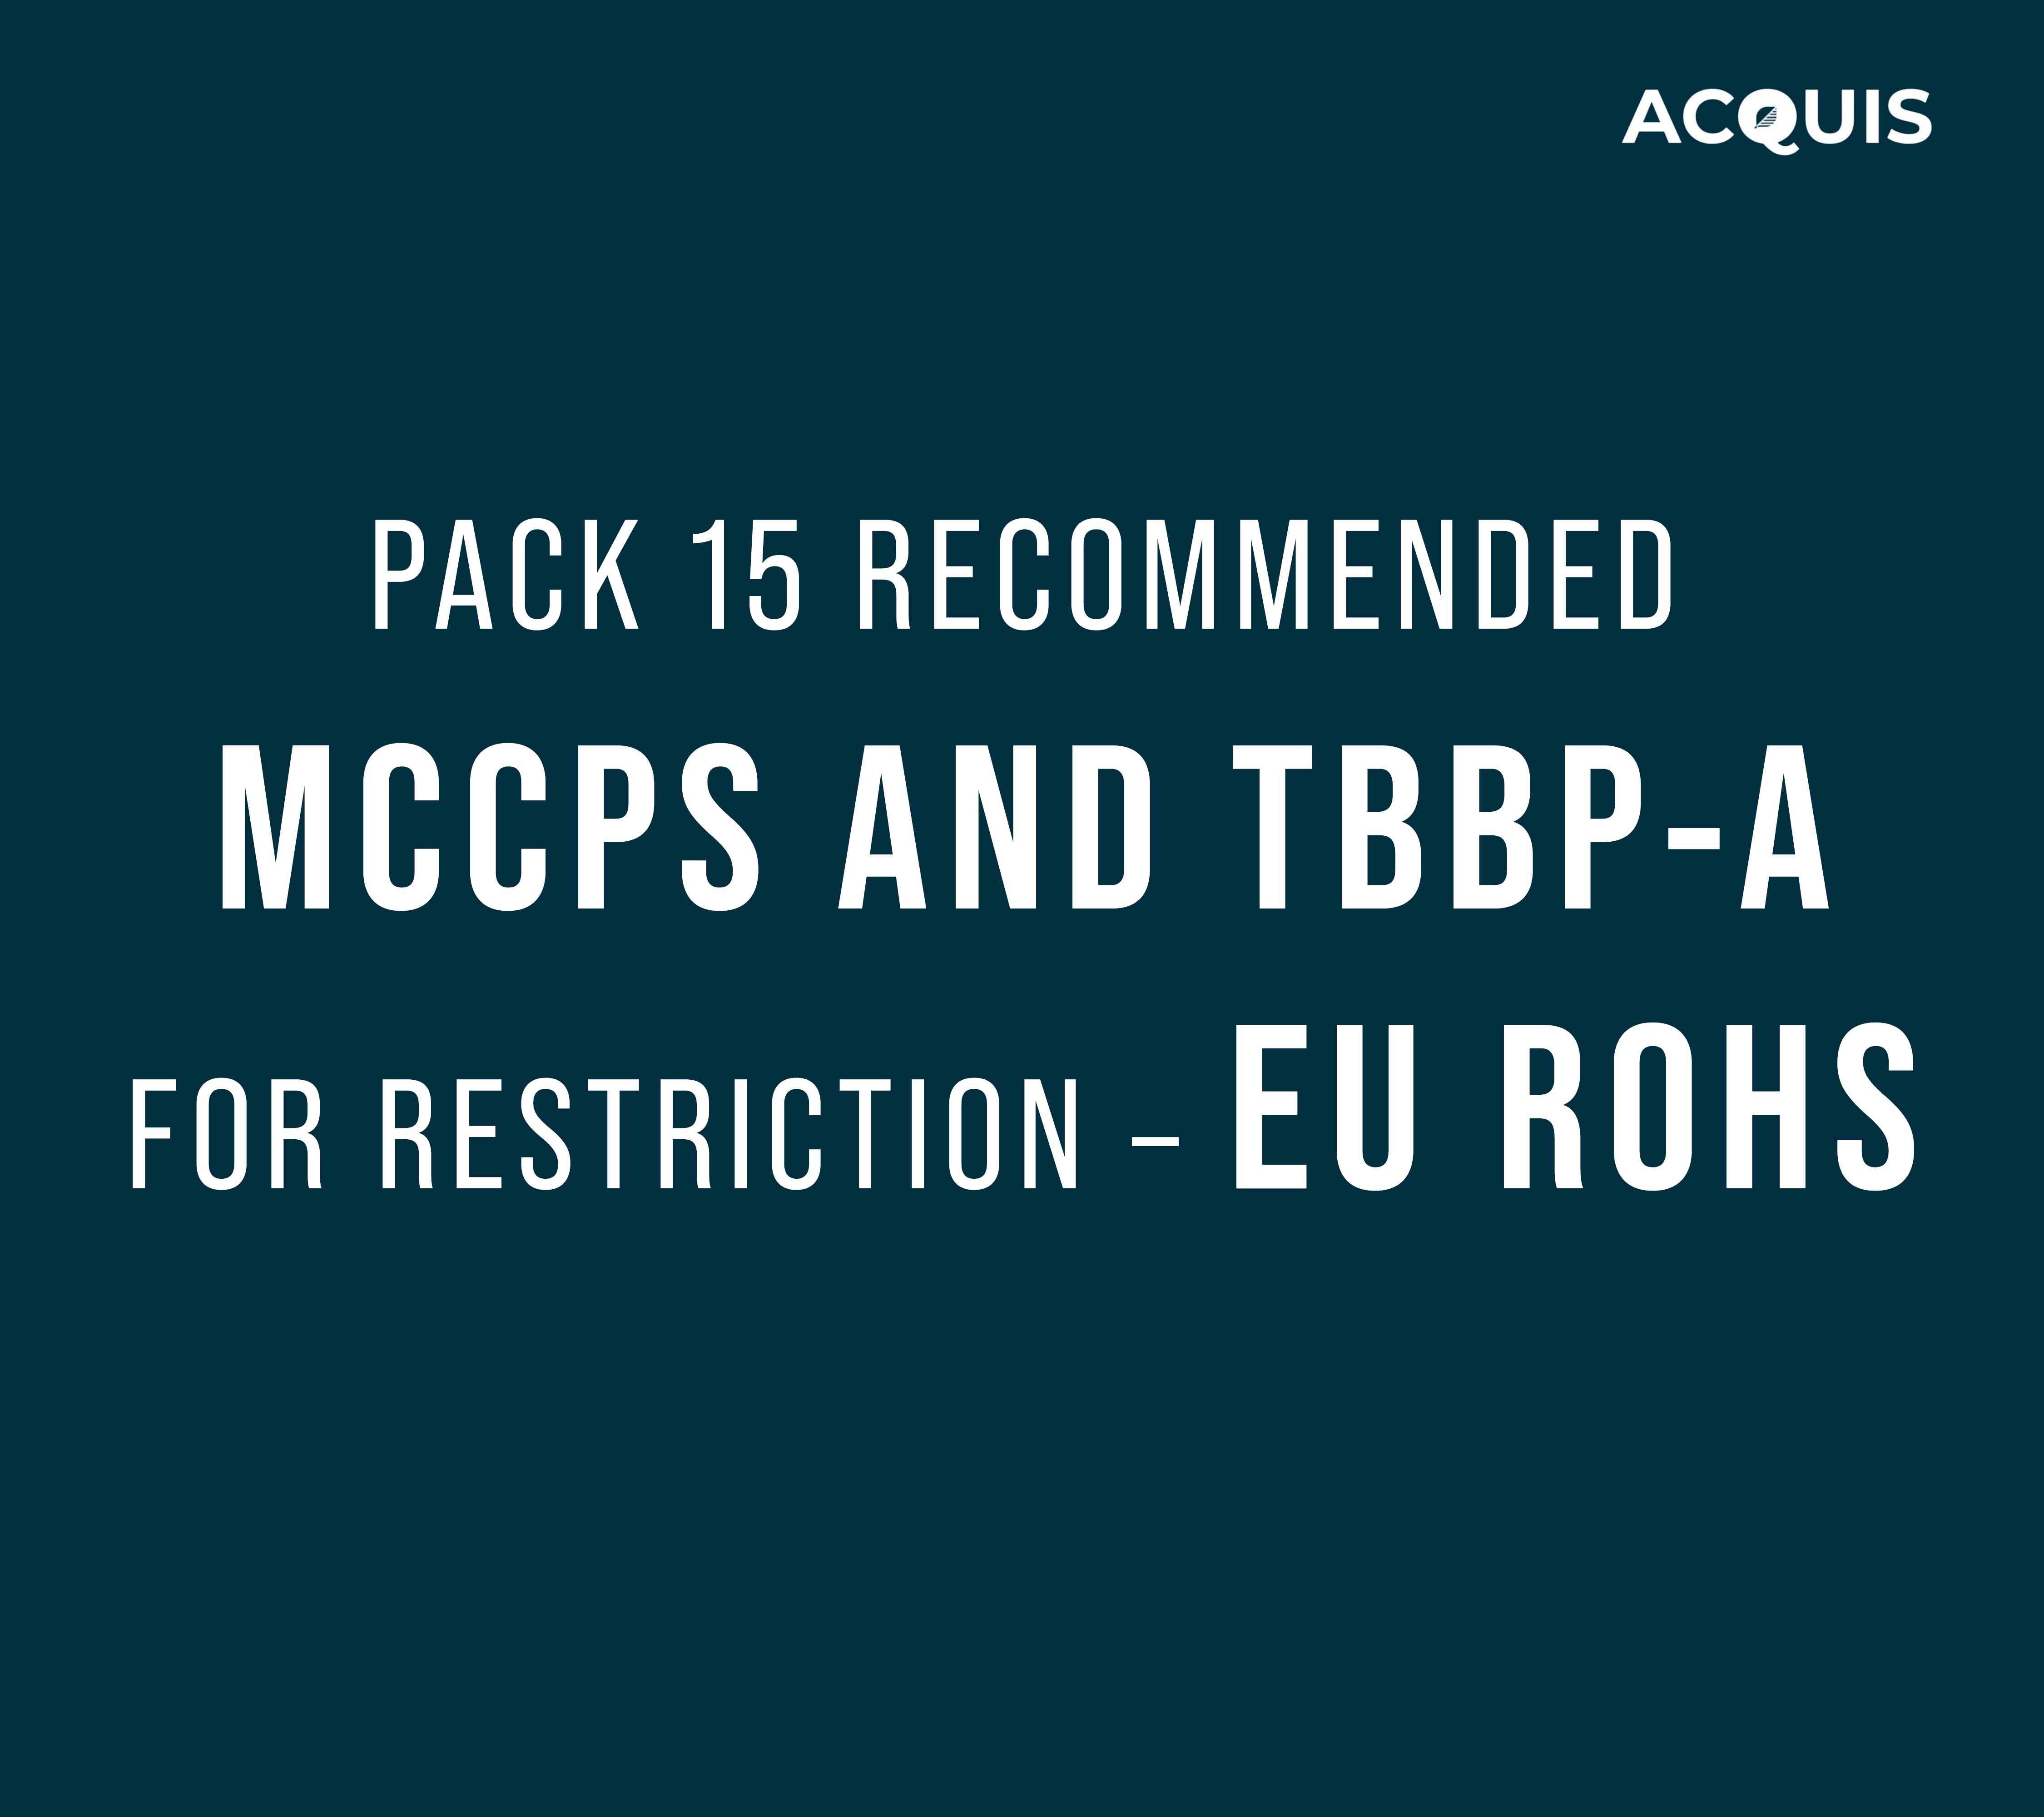 Recommended MCCPs and TBBP-A for Restriction – EU RoHS